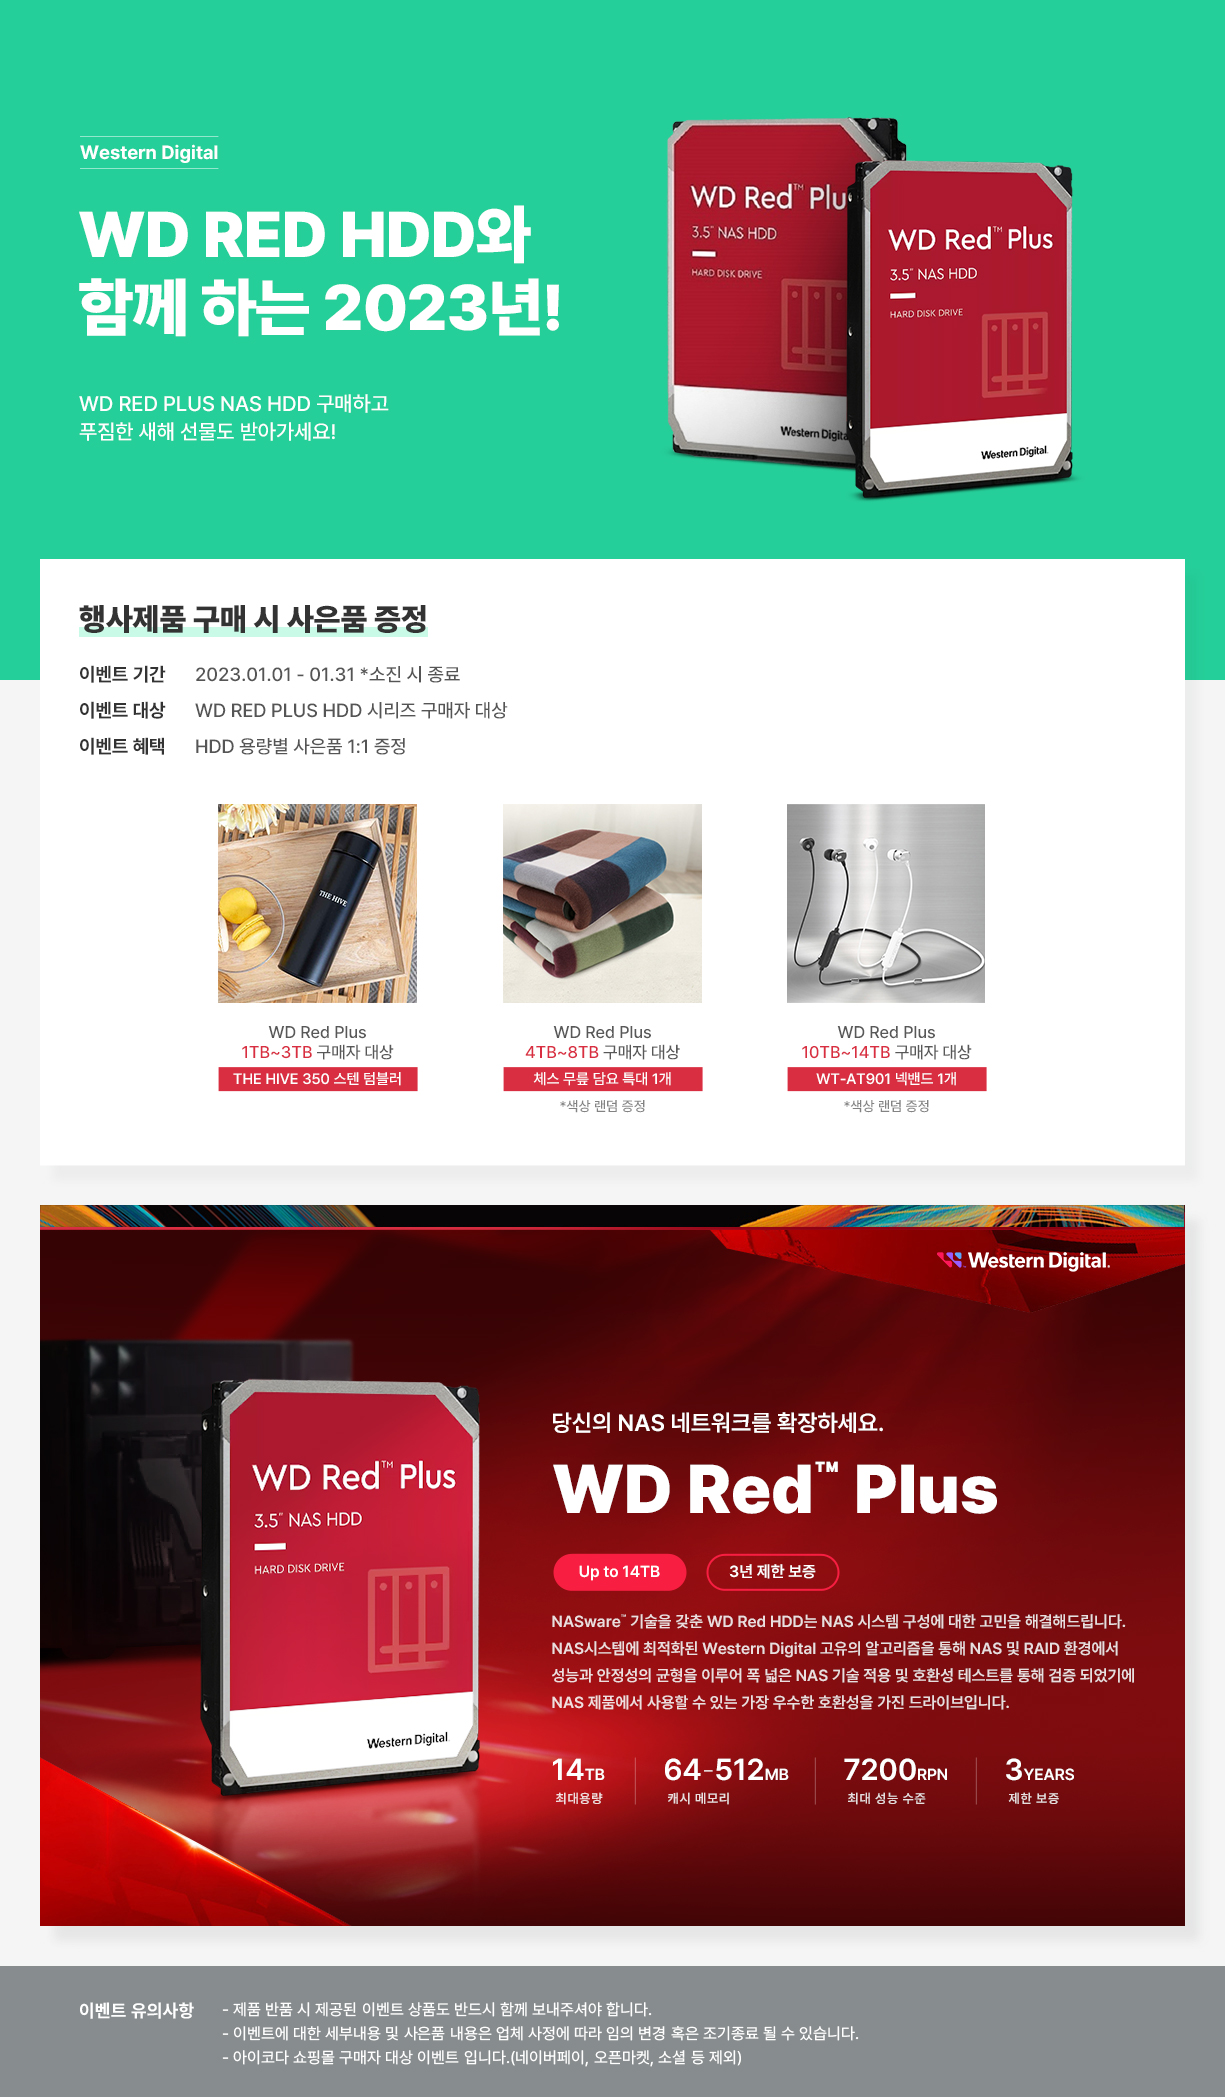 WD_RED_PLUS_HDD_사은.jpg